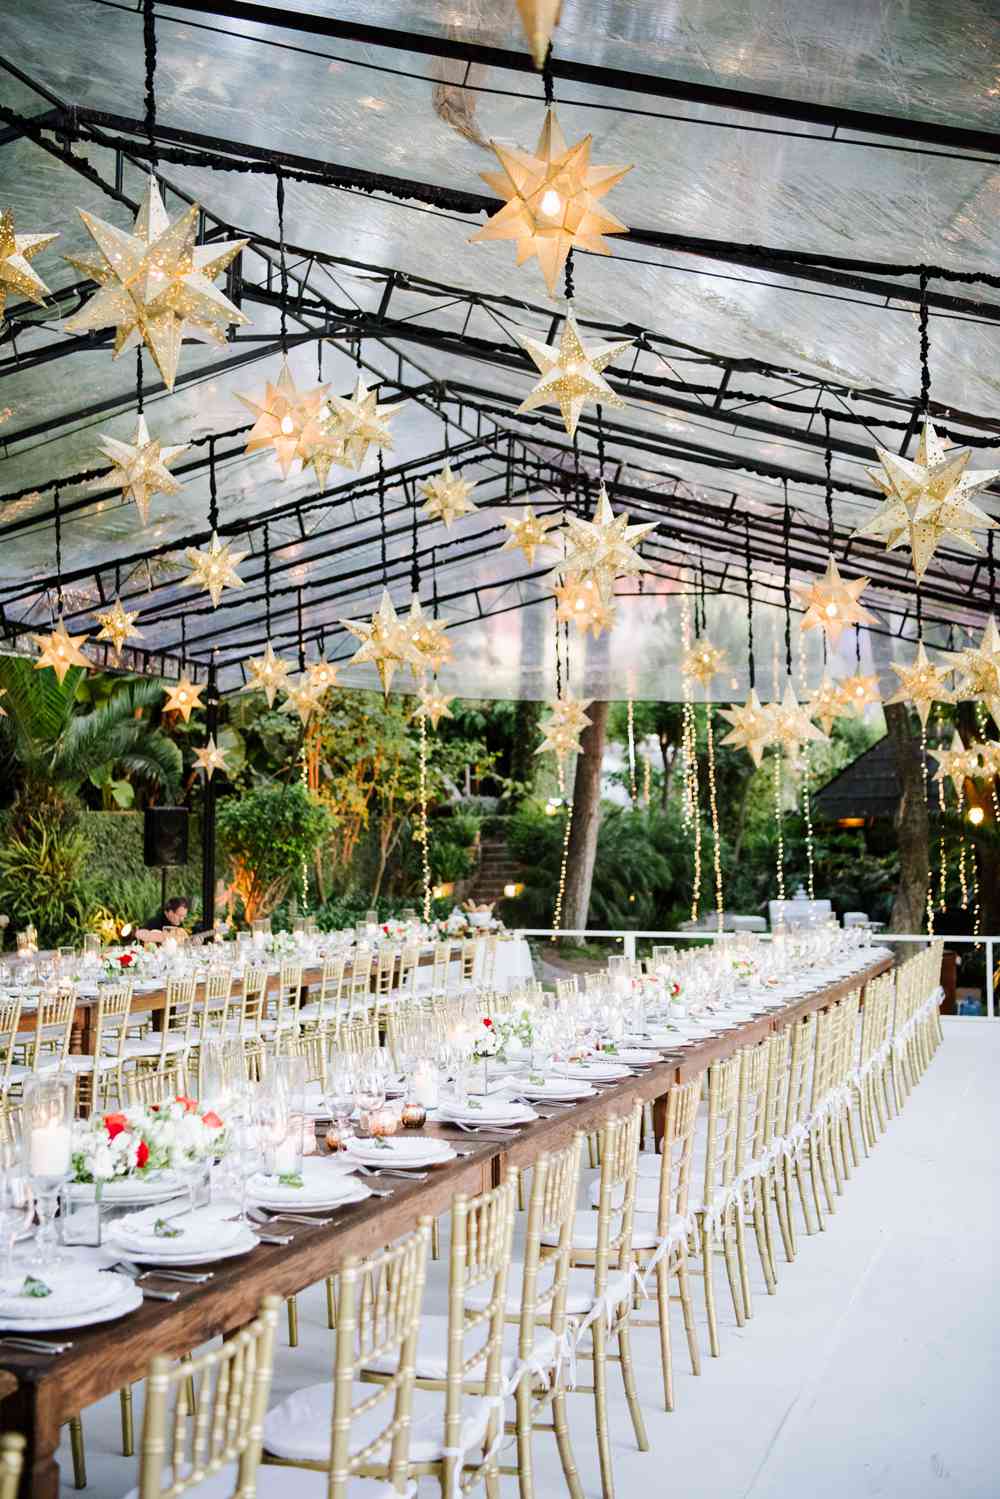 wedding reception tables with star lanterns hanging above